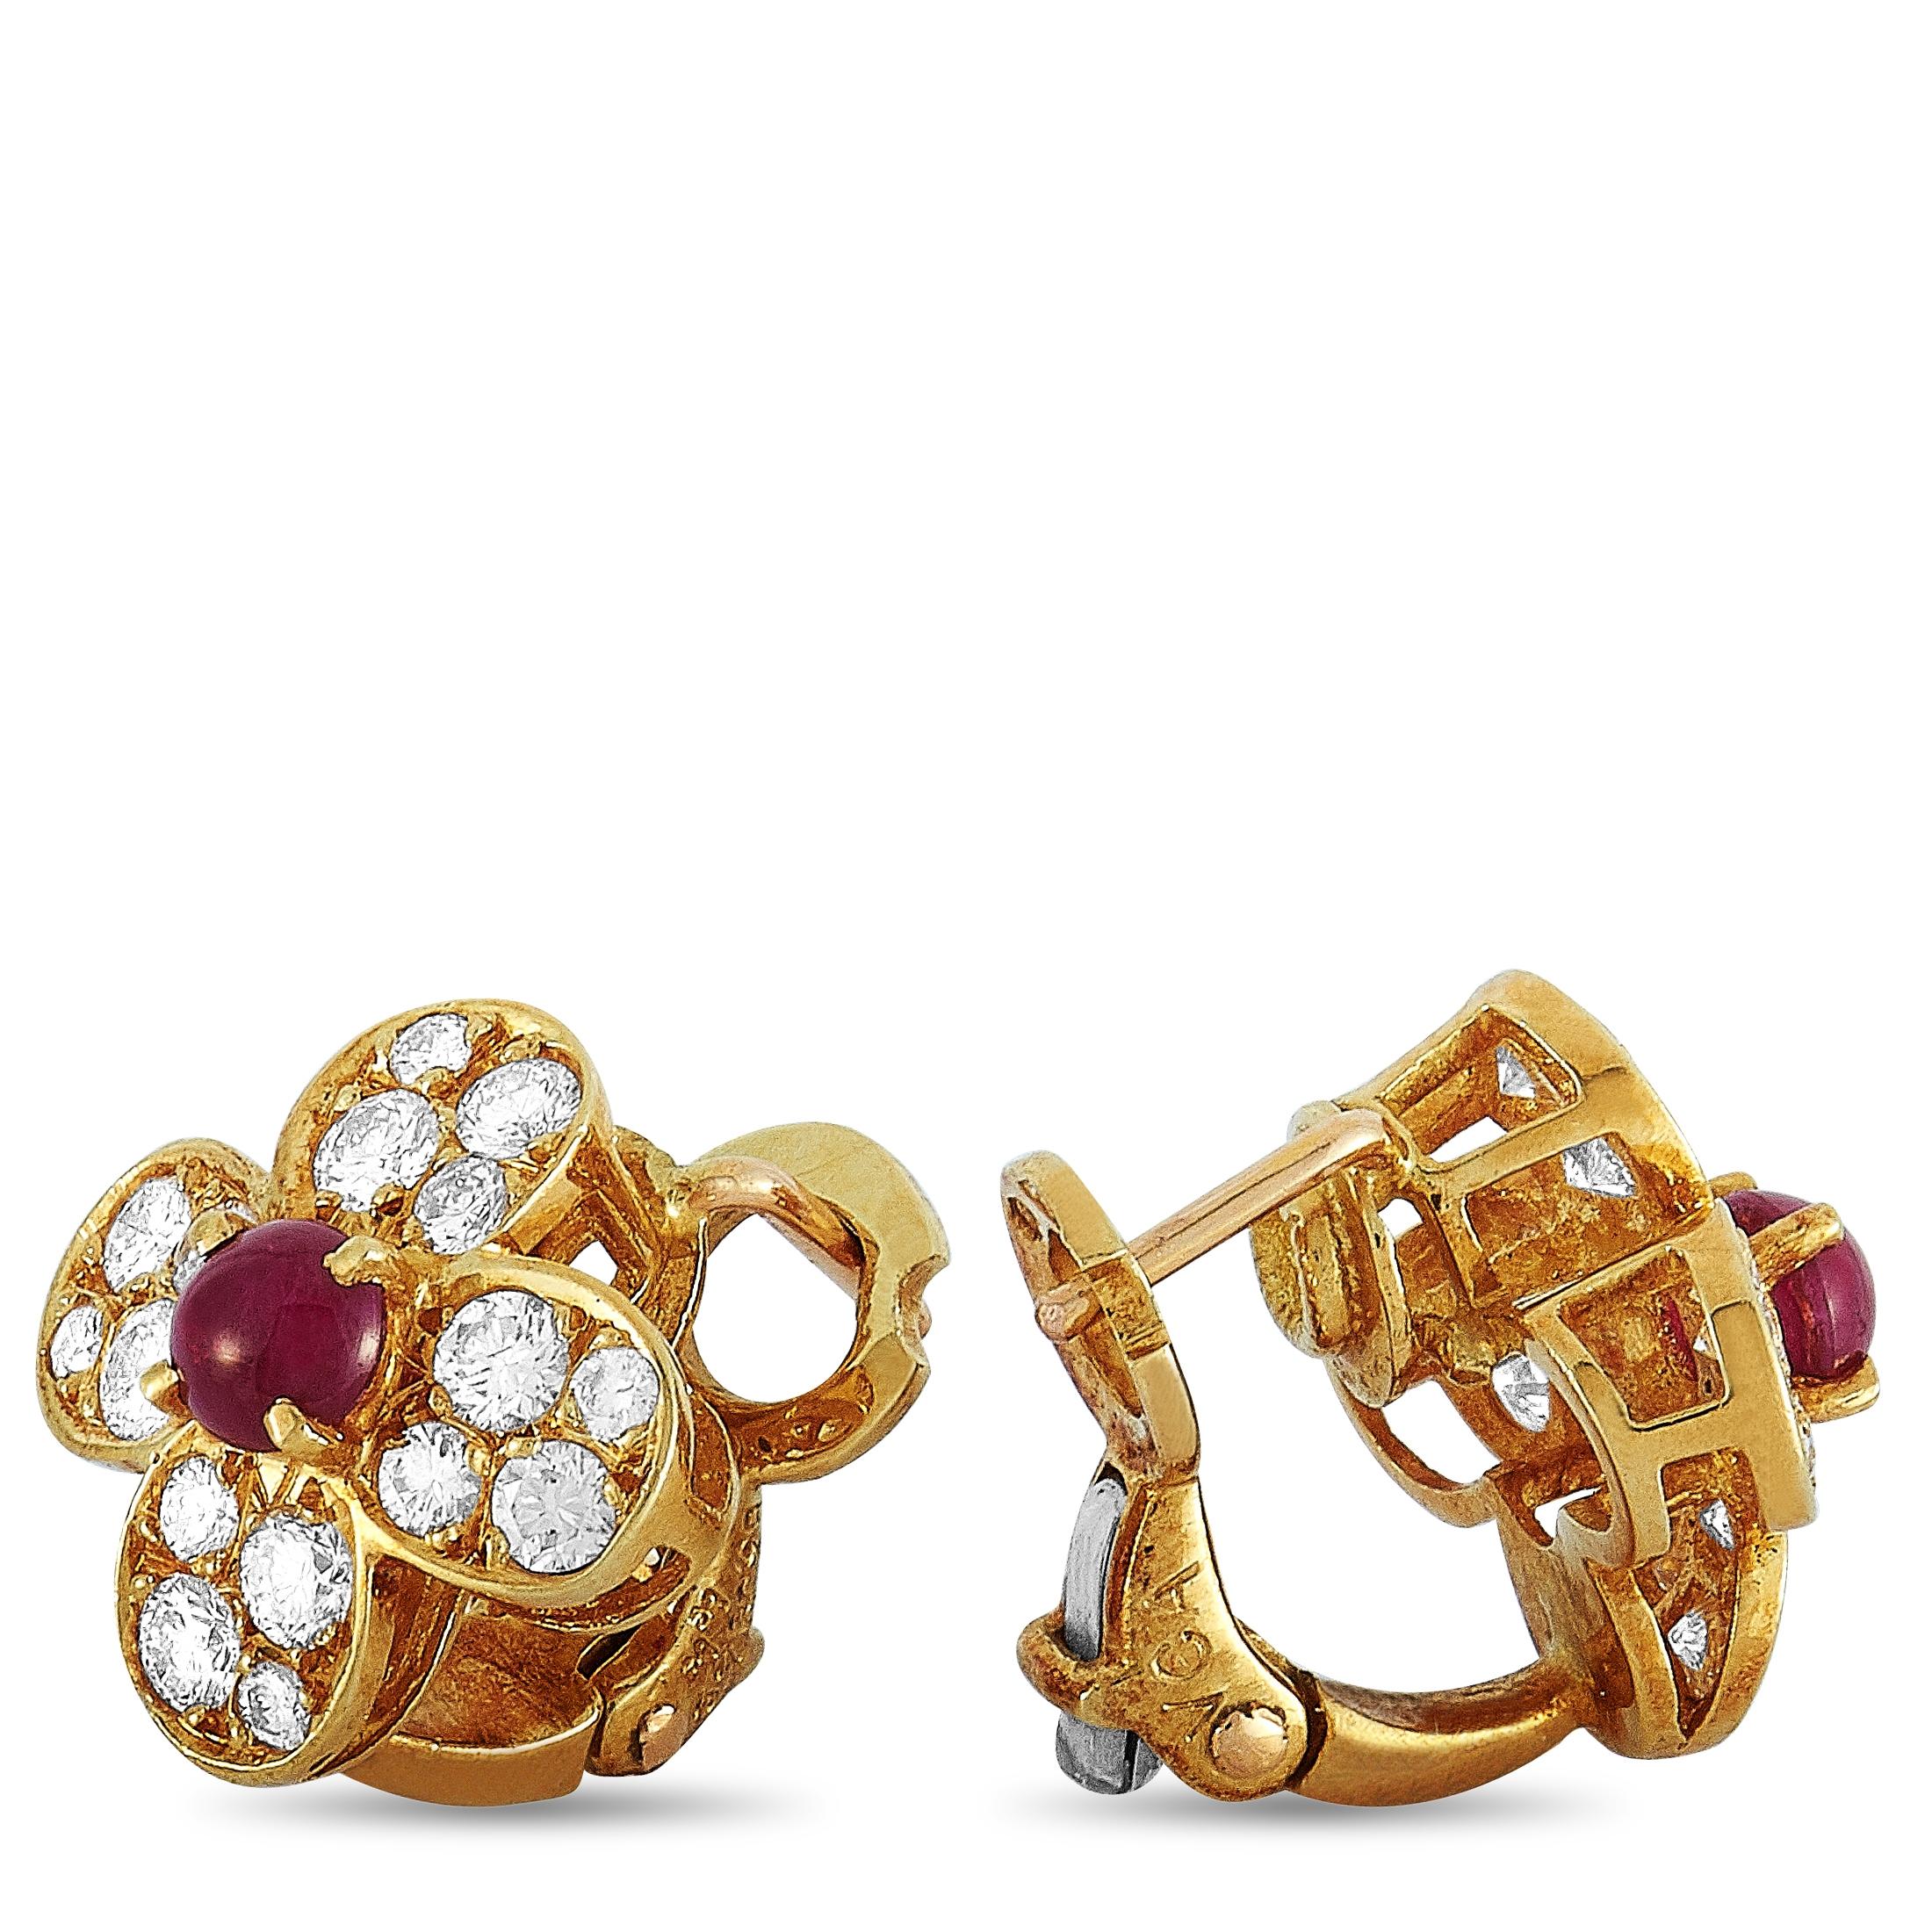 The Van Cleef & Arpels “Trefle” earrings are made of 18K yellow gold and each weighs 3.3 grams, measuring 0.60” in length and 0.60” in width. The earrings are embellished with rubies and a total of 0.82 carats of diamonds that boast grade E color